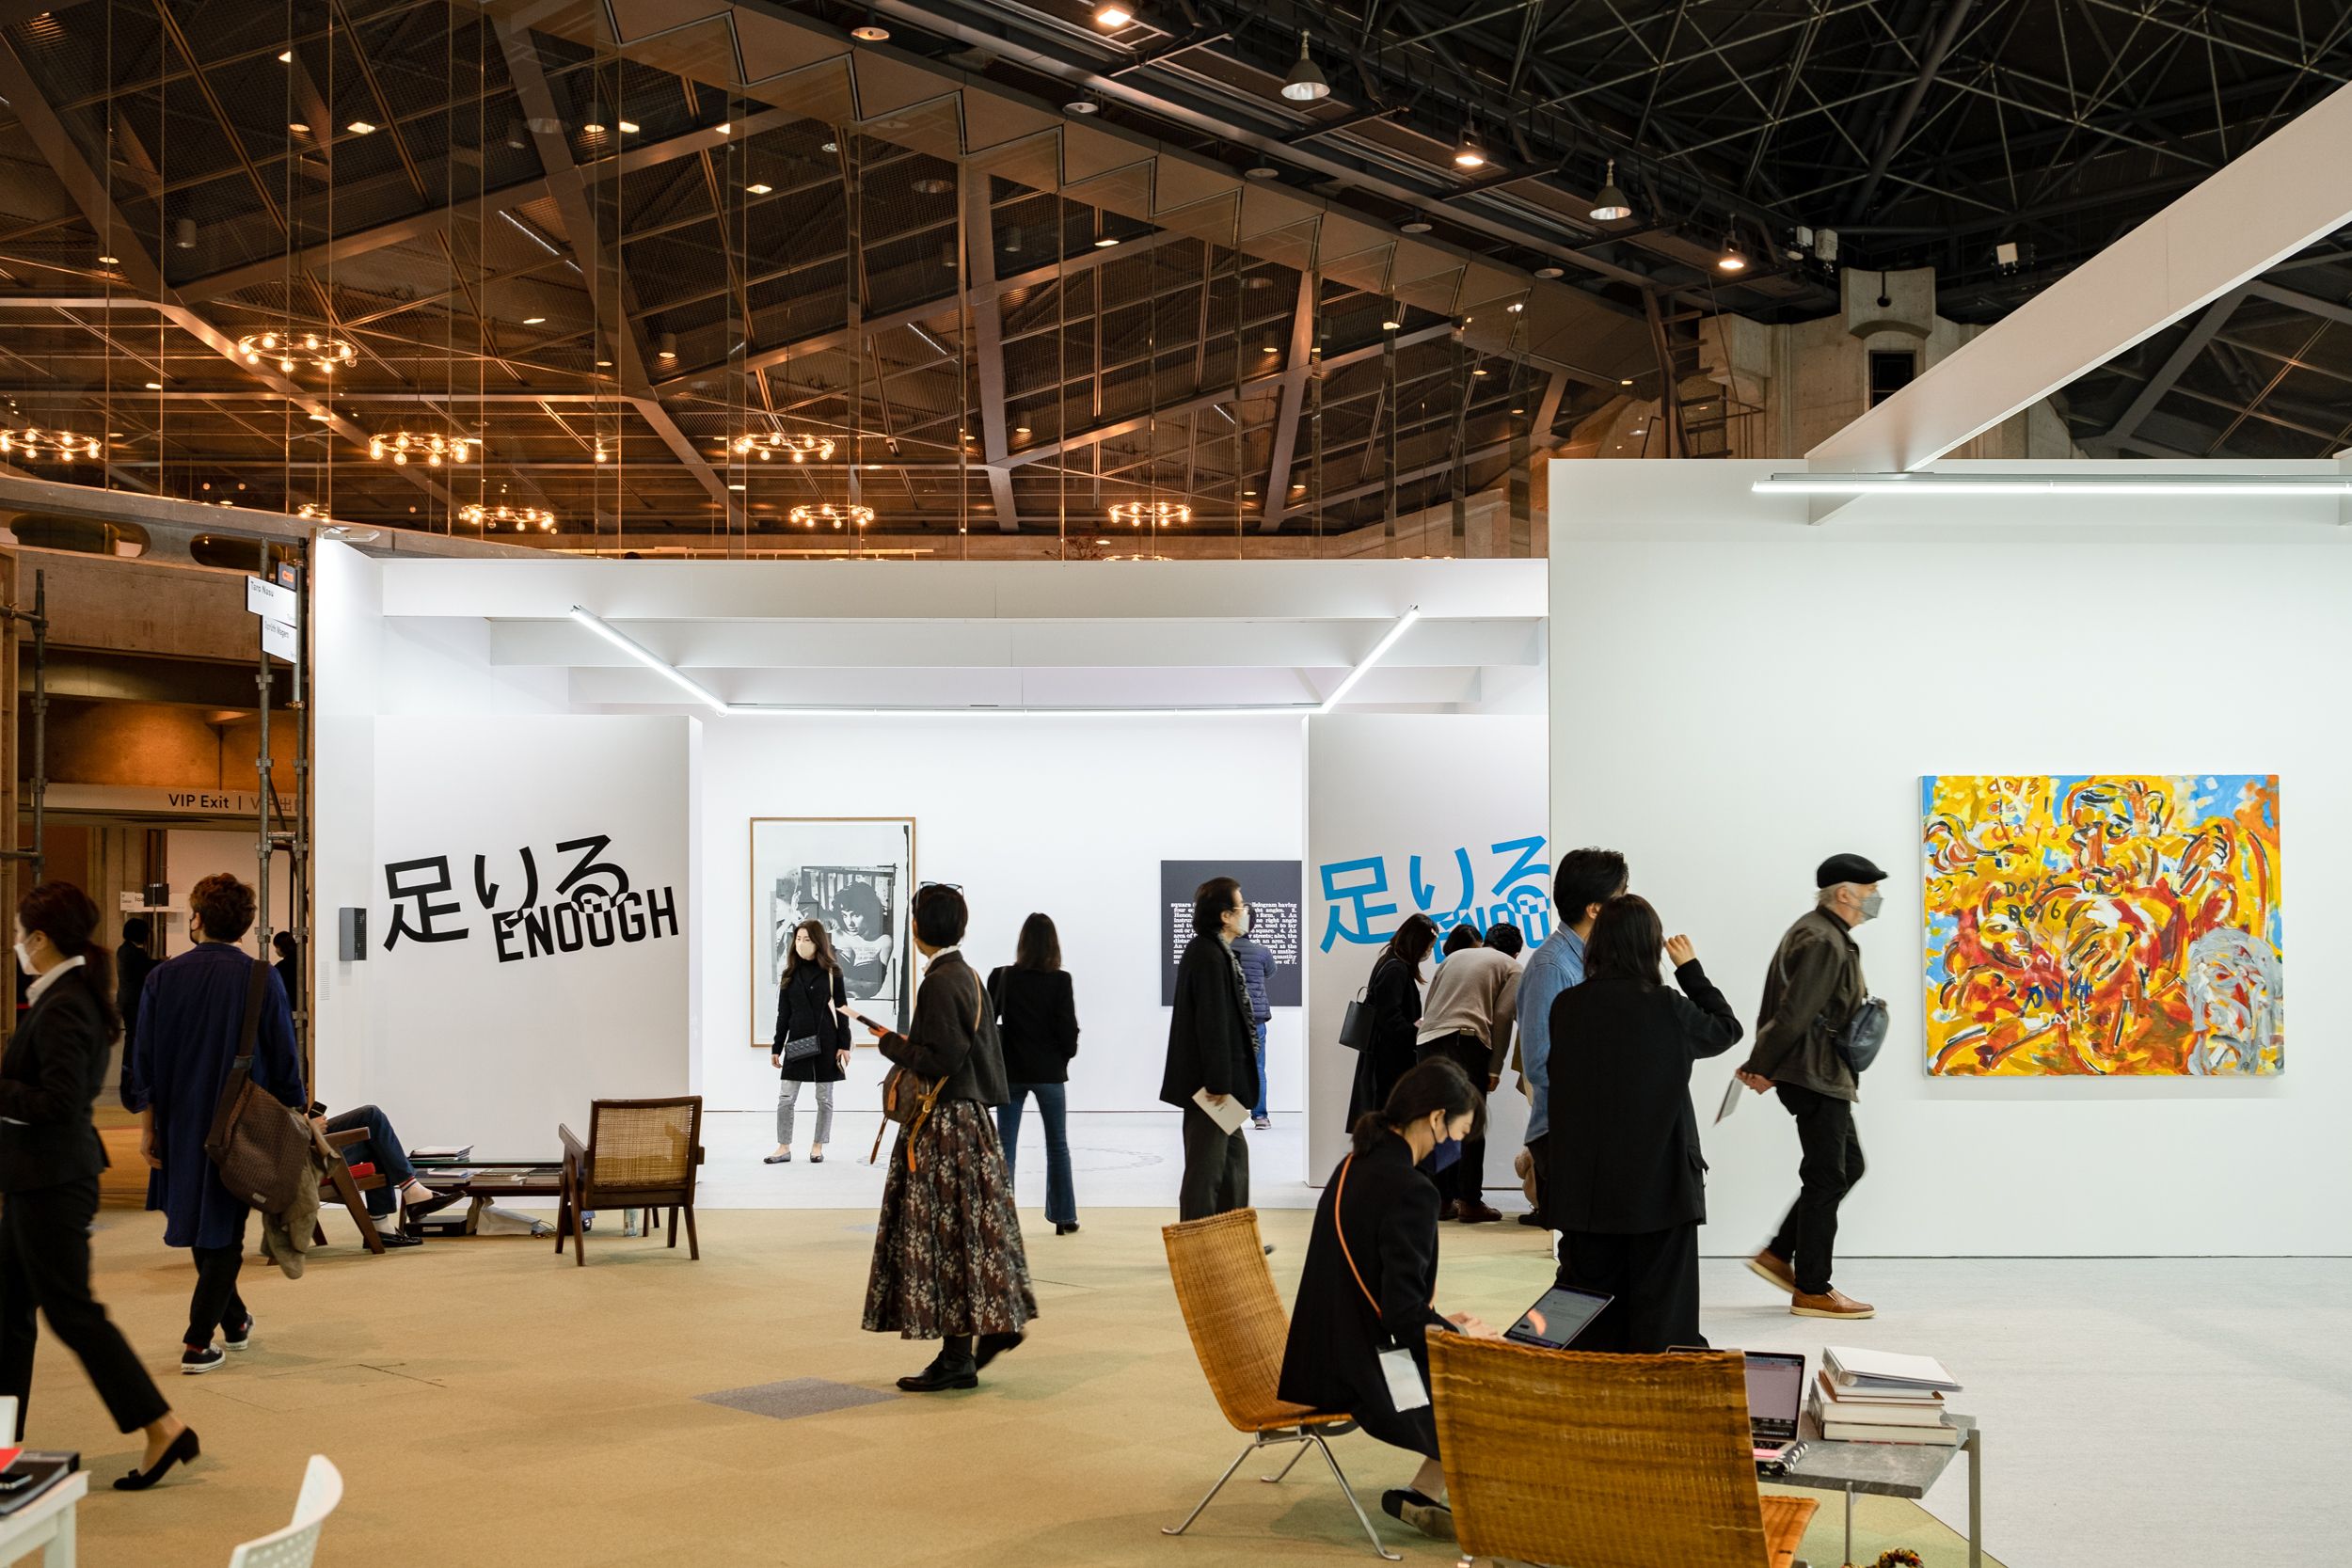 Art Collaboration Kyoto (ACK) Third Edition: Wraps Up with “Consistent Sales”